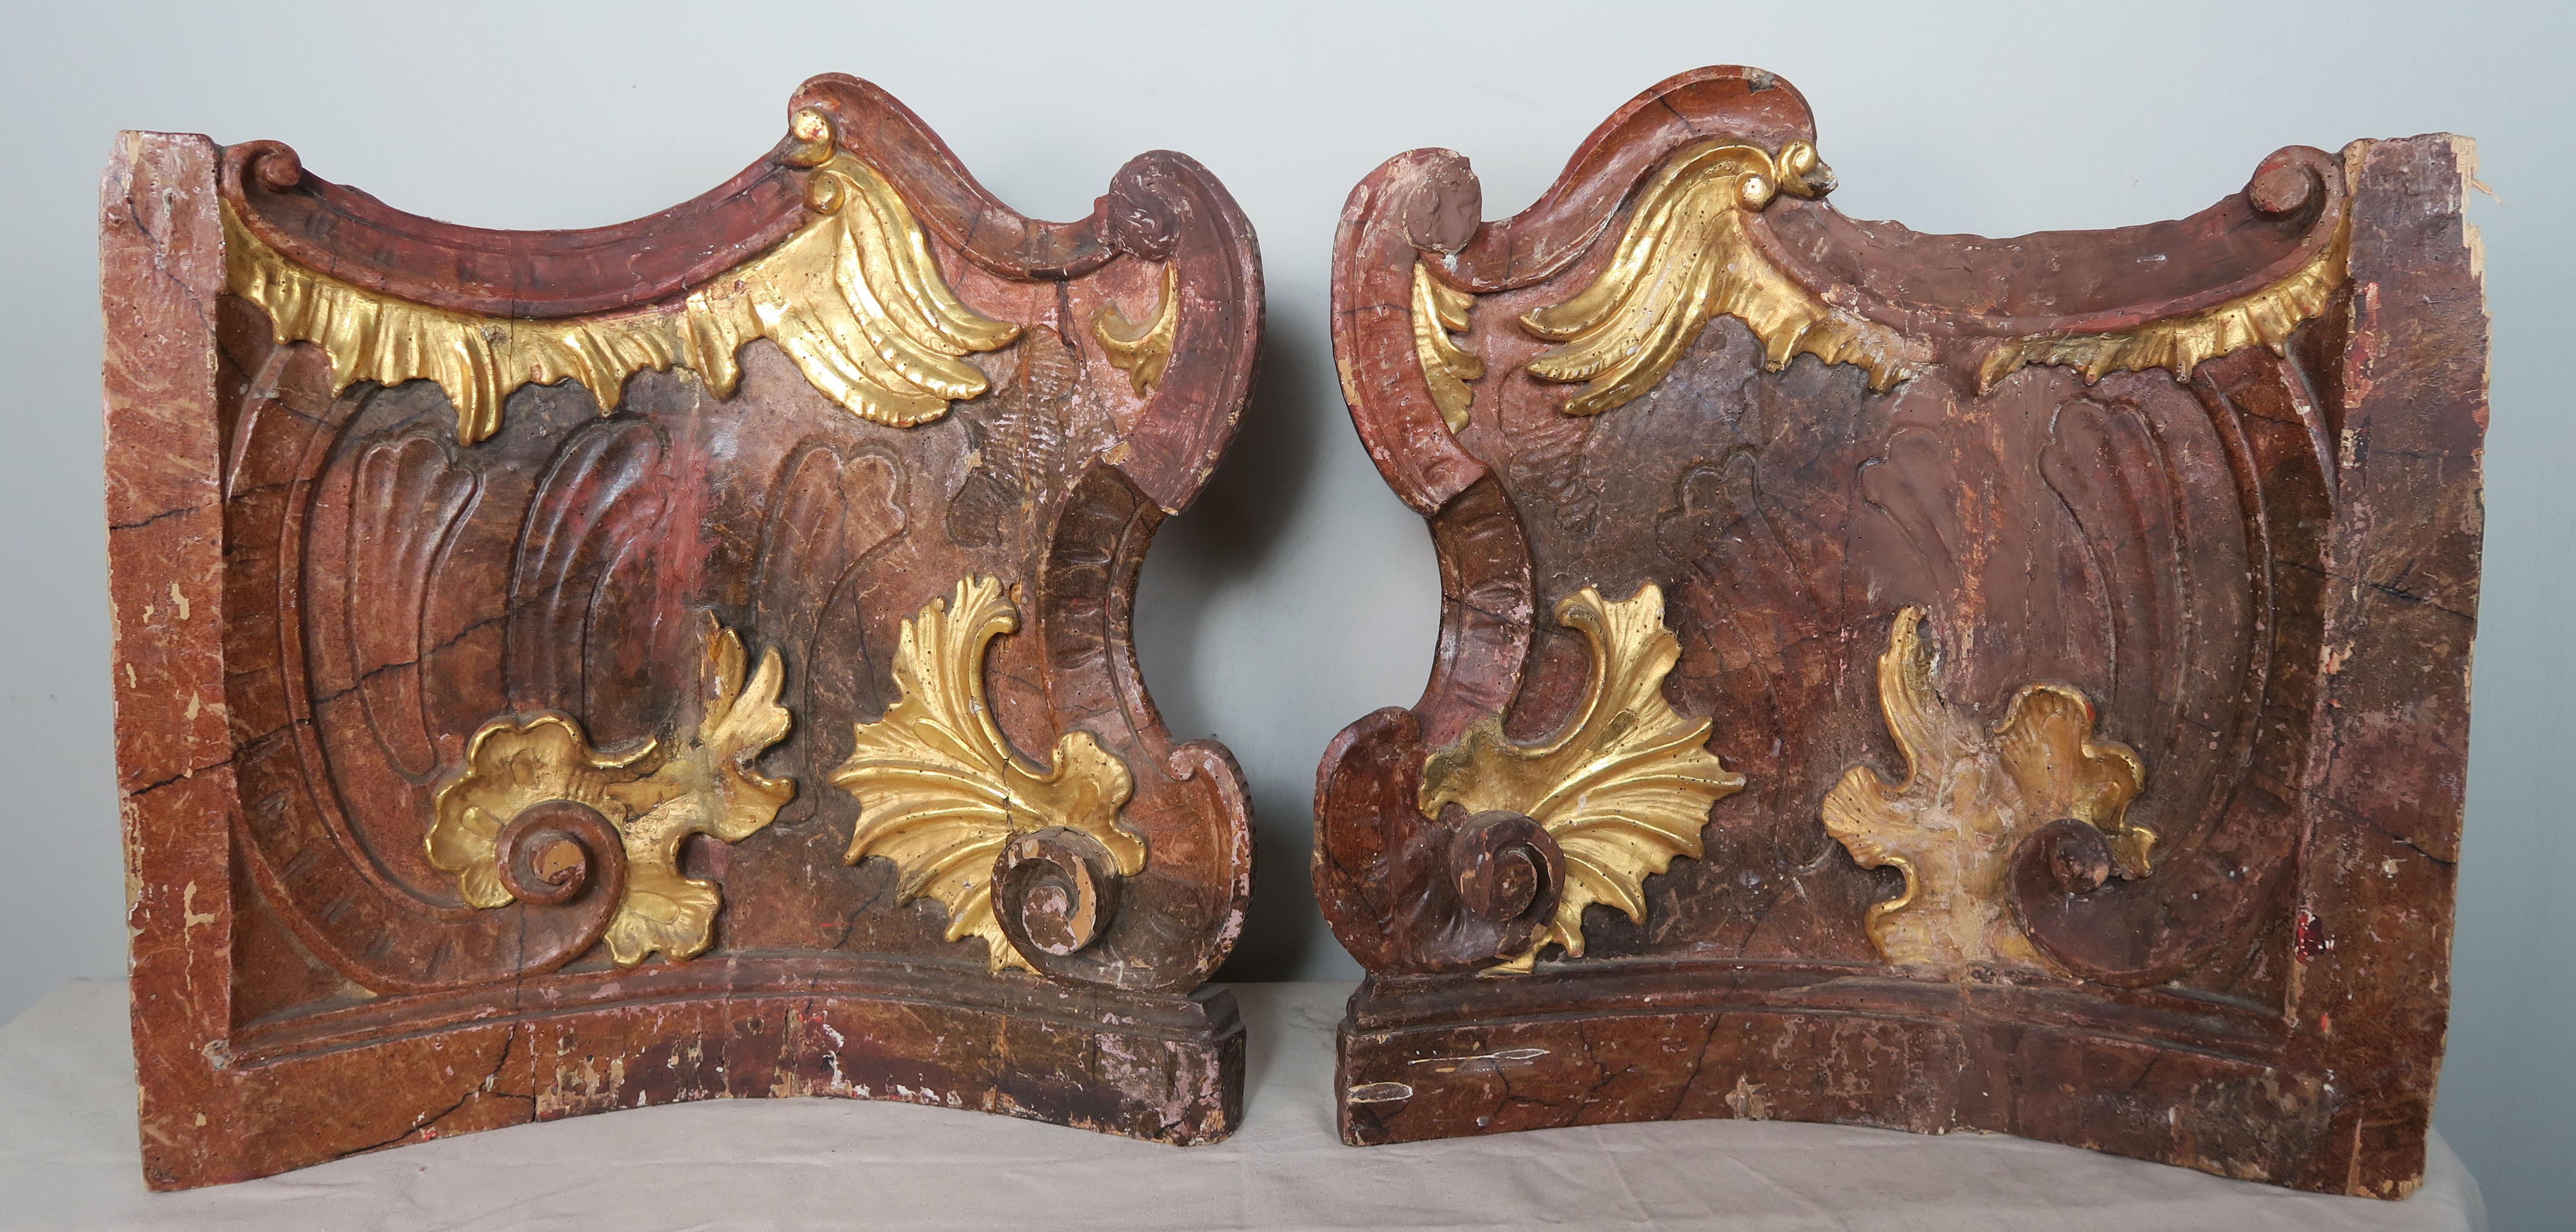 19th century Italian painted and parcel-gilt carved wood architectural fragments. They would be beautiful mounted on Lucite bases or used during the building process.